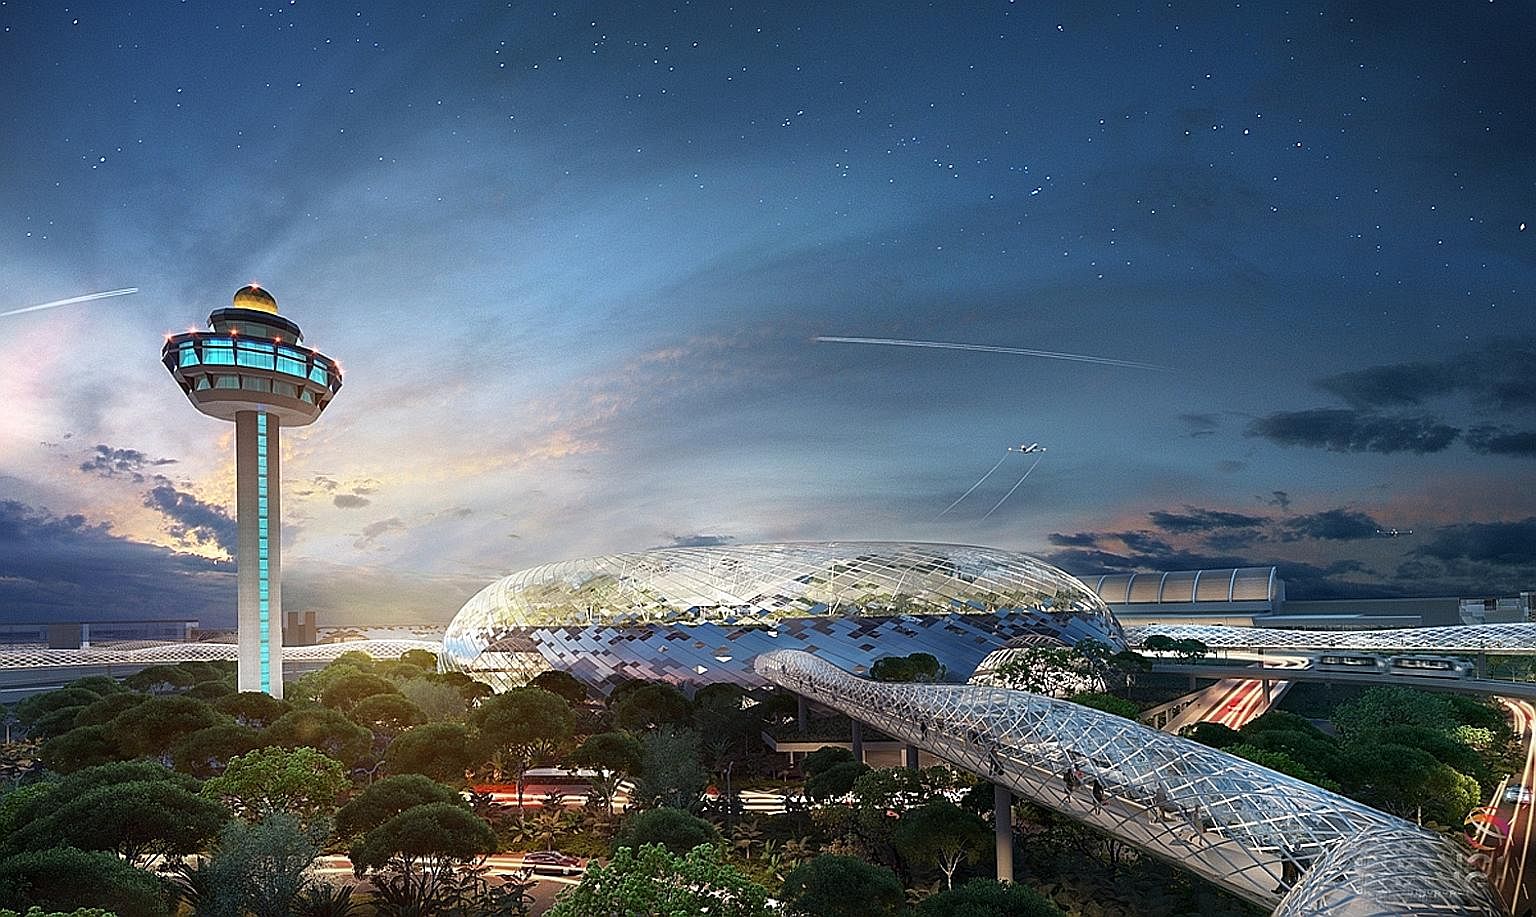 An artist's impression of Project Jewel, Changi Airport's first tie-up with a private firm. It will offer mainly retail services.